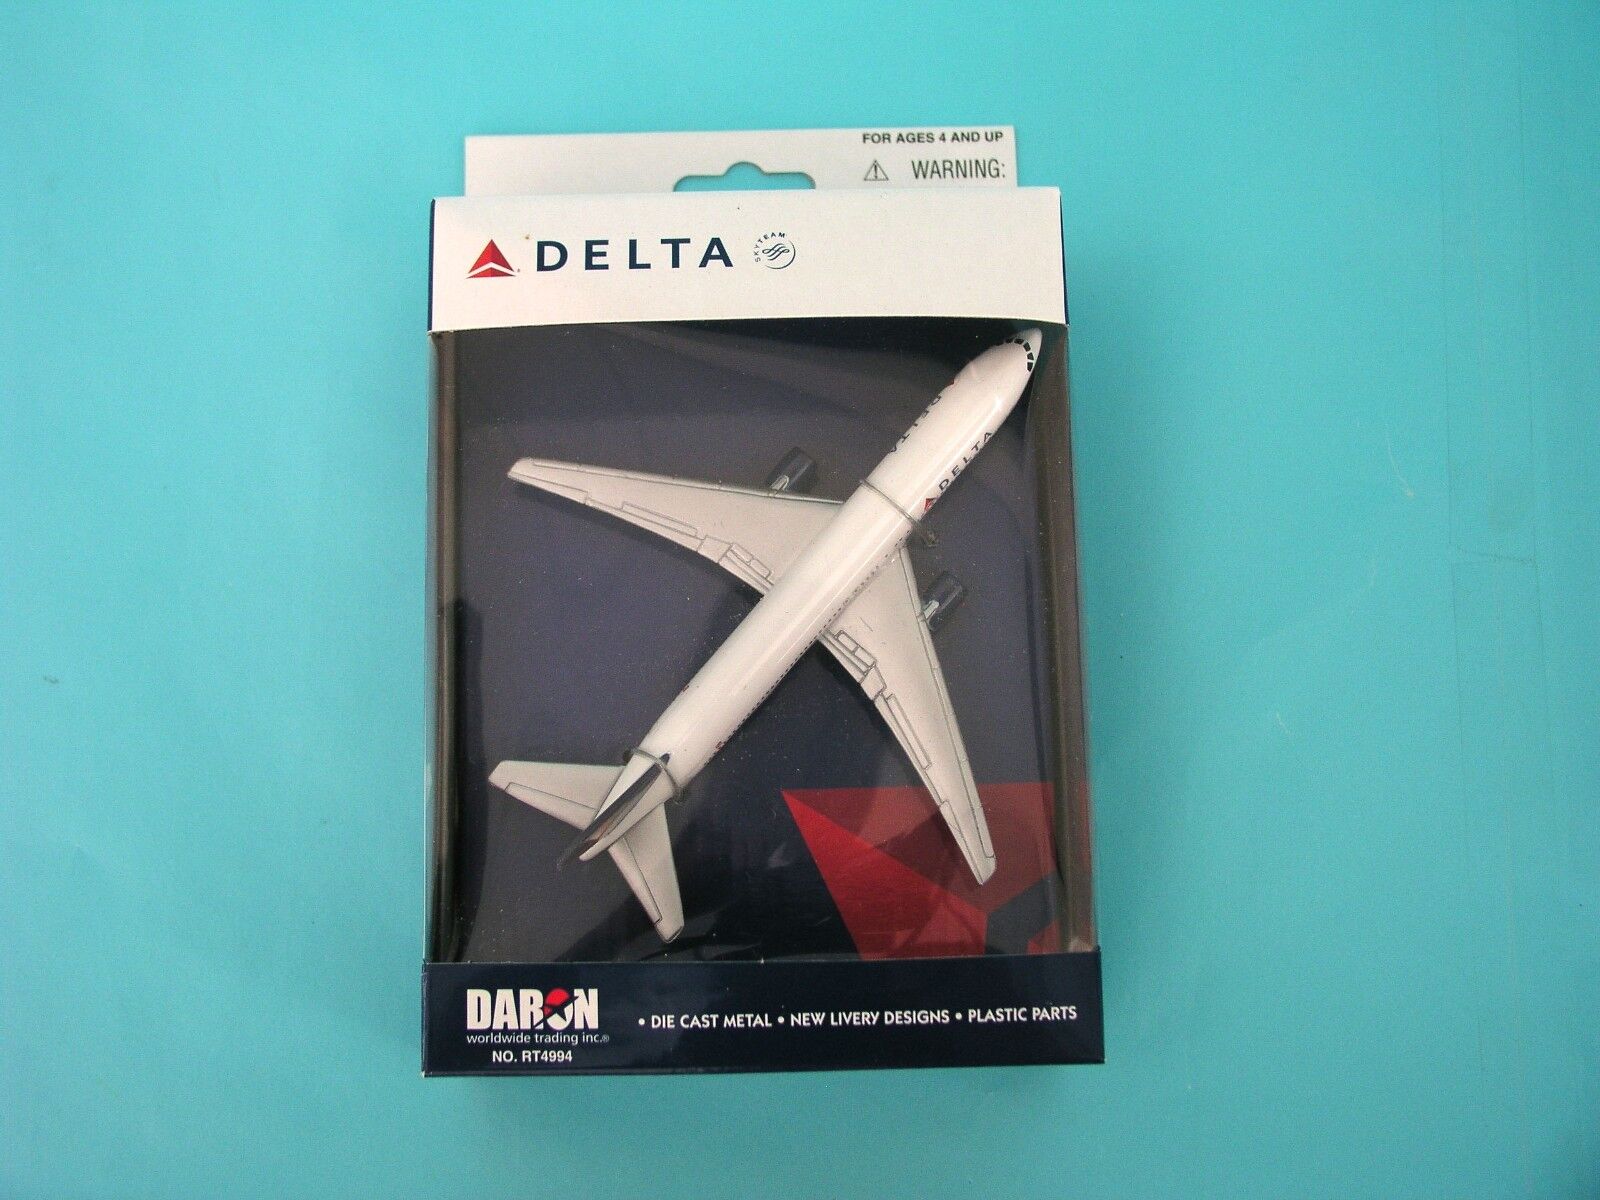 DARON REALTOY RT4994 Delta Air Lines Boeing 767 1/375 New Livery Diecast. New